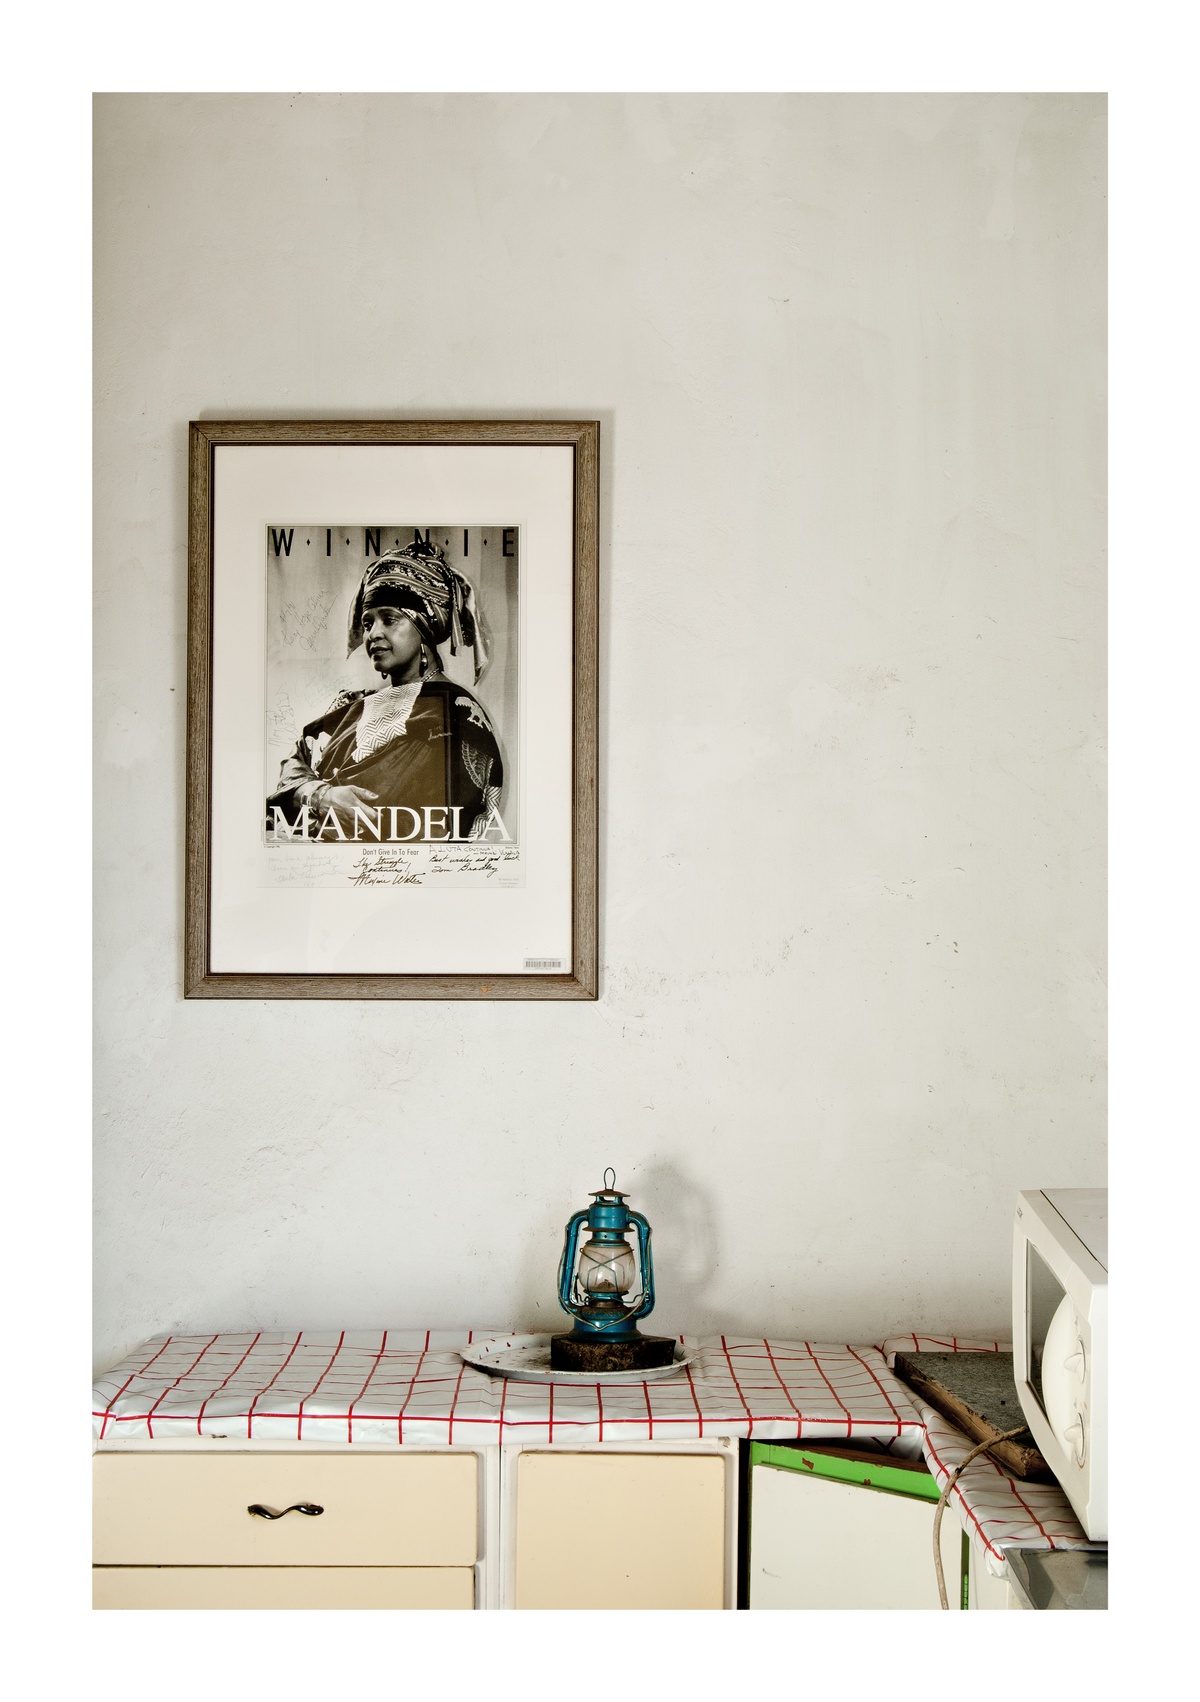 Photograph ‘Kwa Mamtshali, Phiri, Soweto’ from Jabulani Dhlamini’s residency on A4’s top floor. At the front, an oil lantern sits on kitchen cupboard. At the back, a framed photograph of Winnie Mandela is mounted on the wall.
